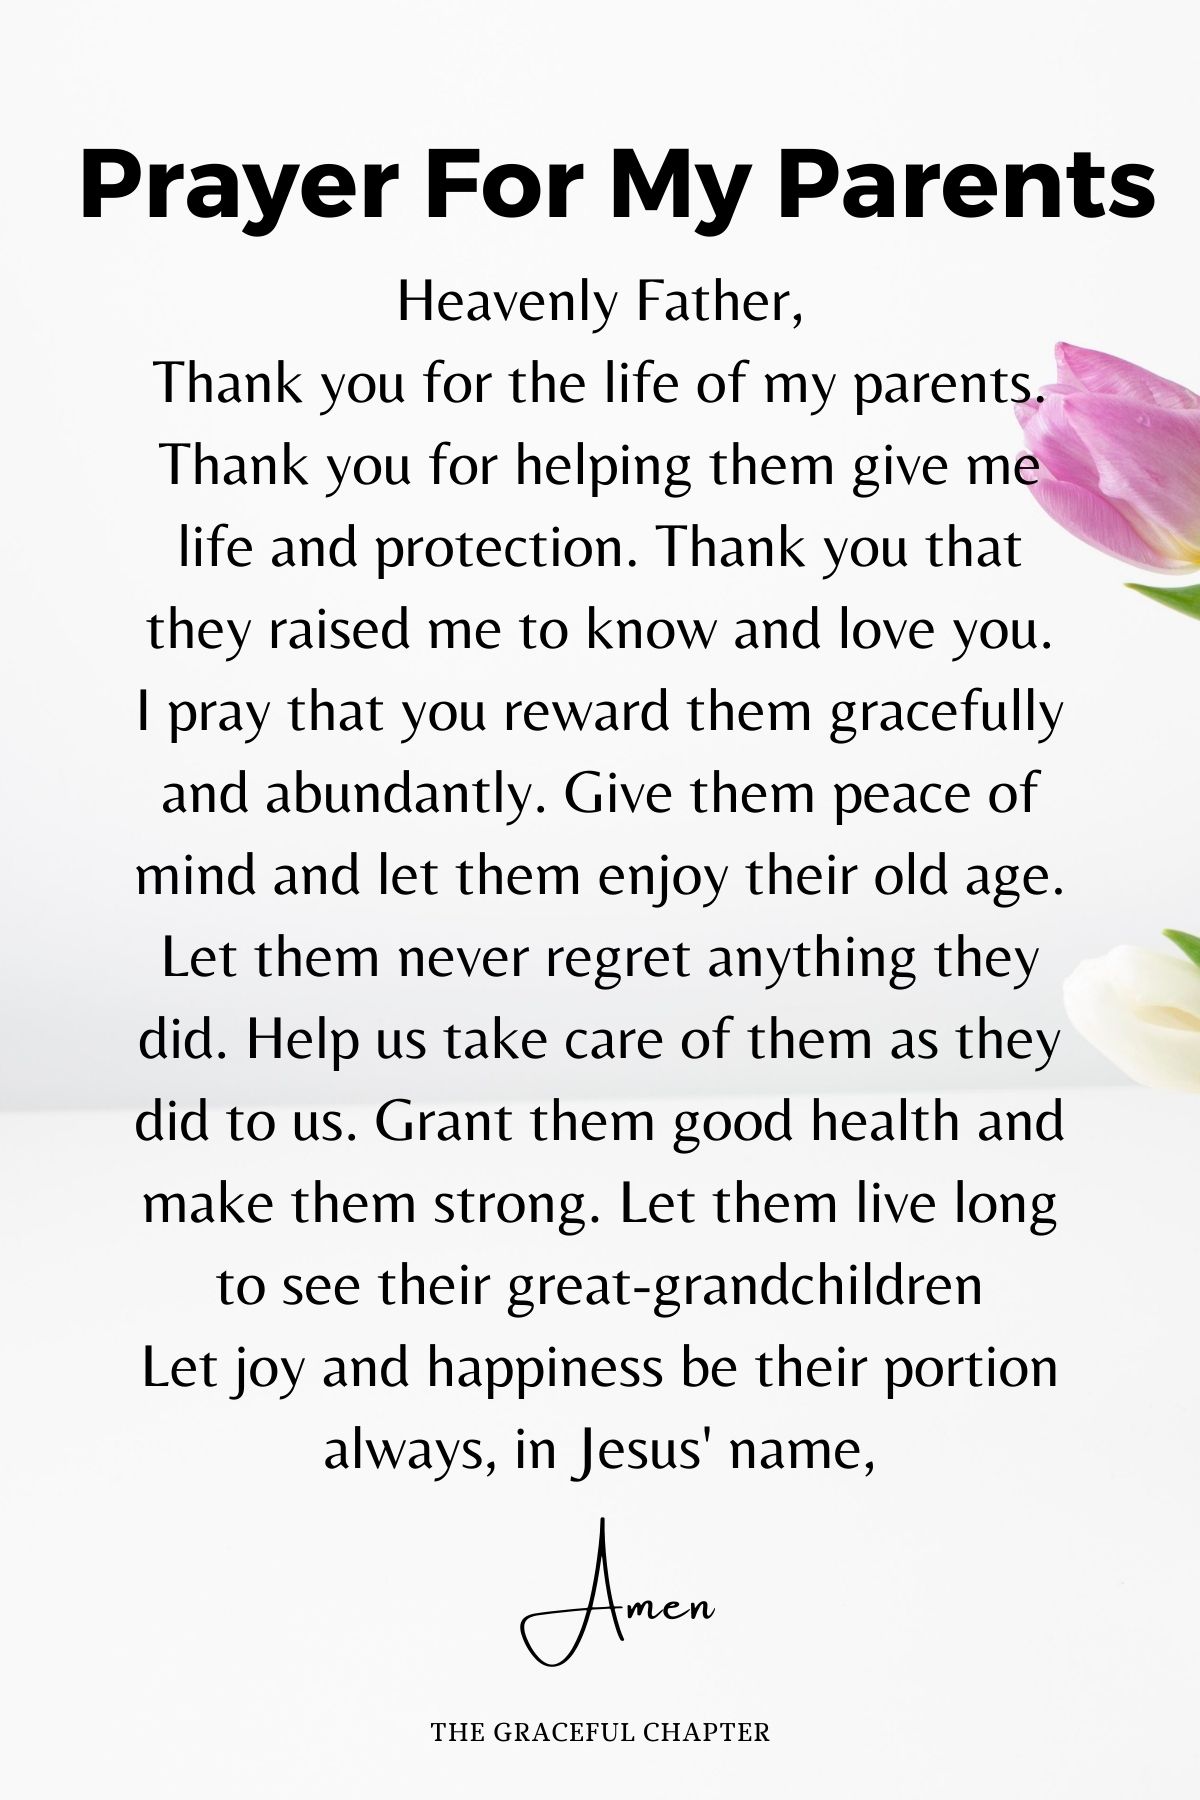 Prayer for my parents